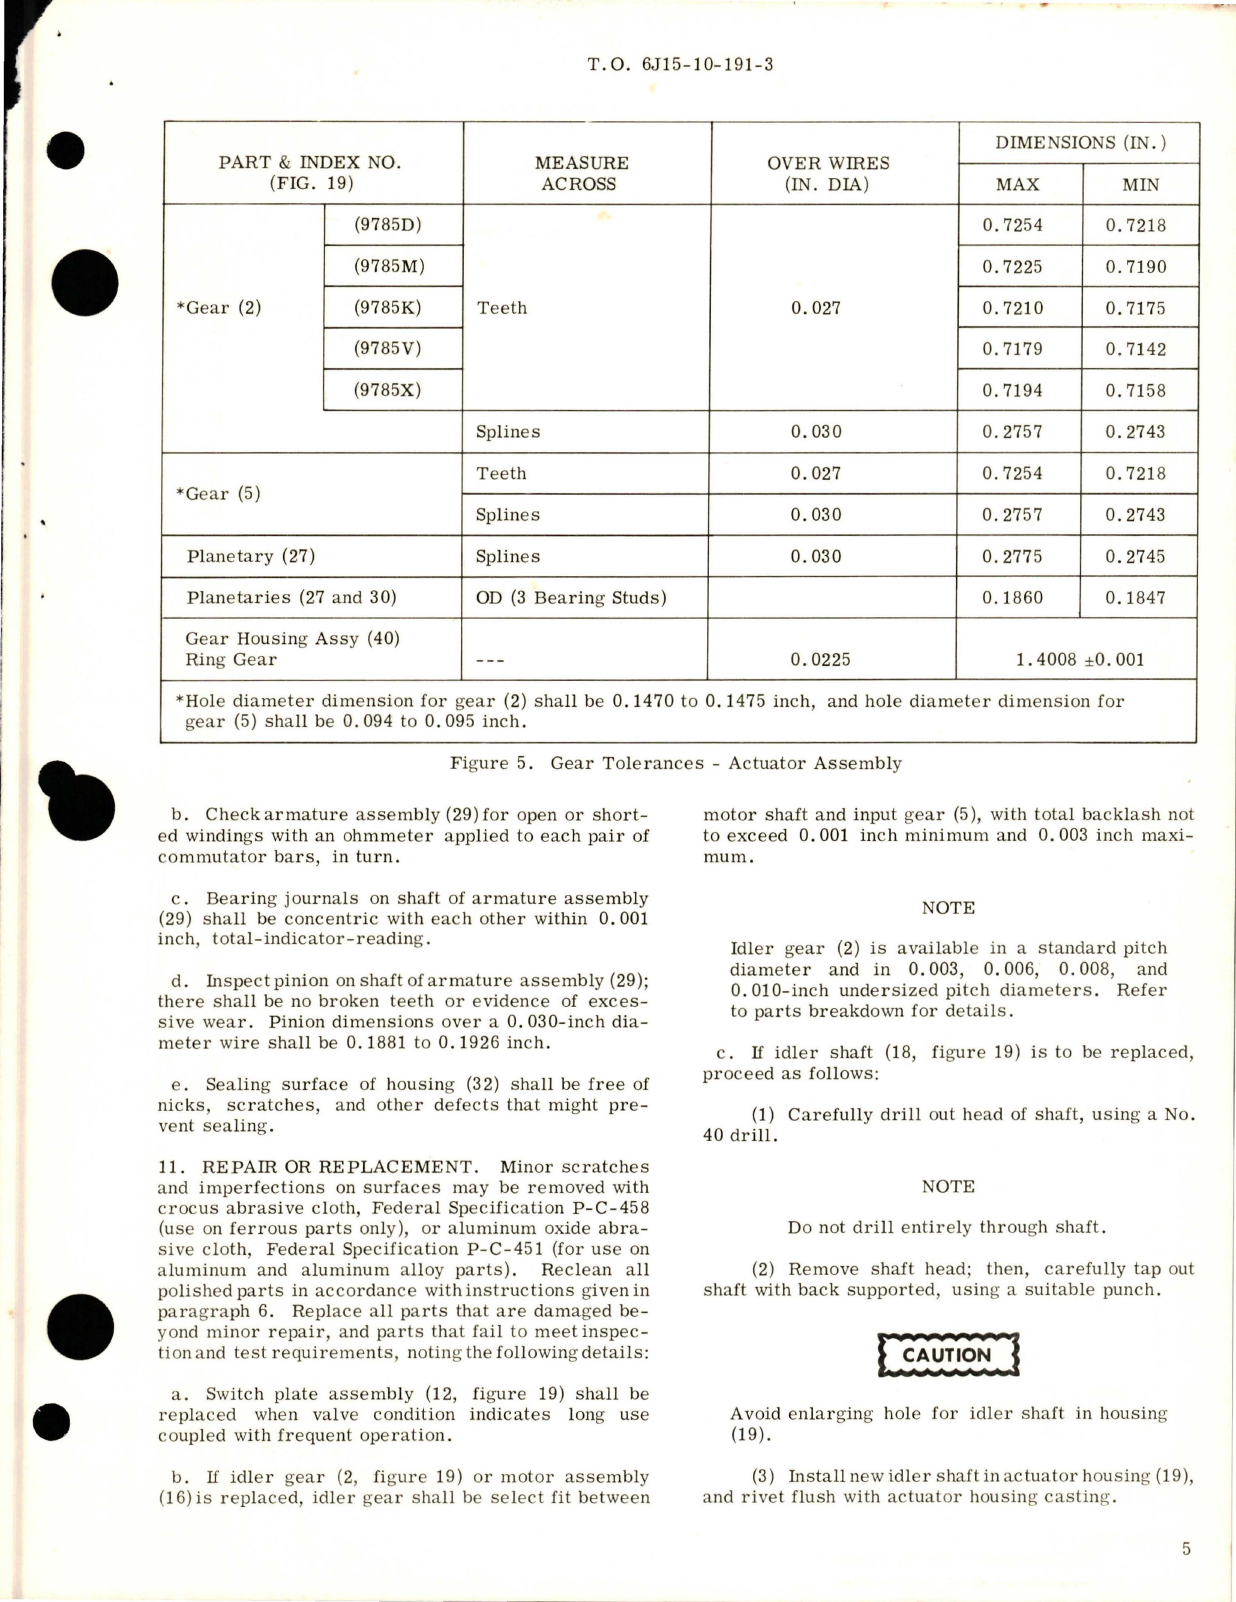 Sample page 7 from AirCorps Library document: Overhaul with Parts Breakdown for Motor-Operated Gate Valve - Part AV16B1738D